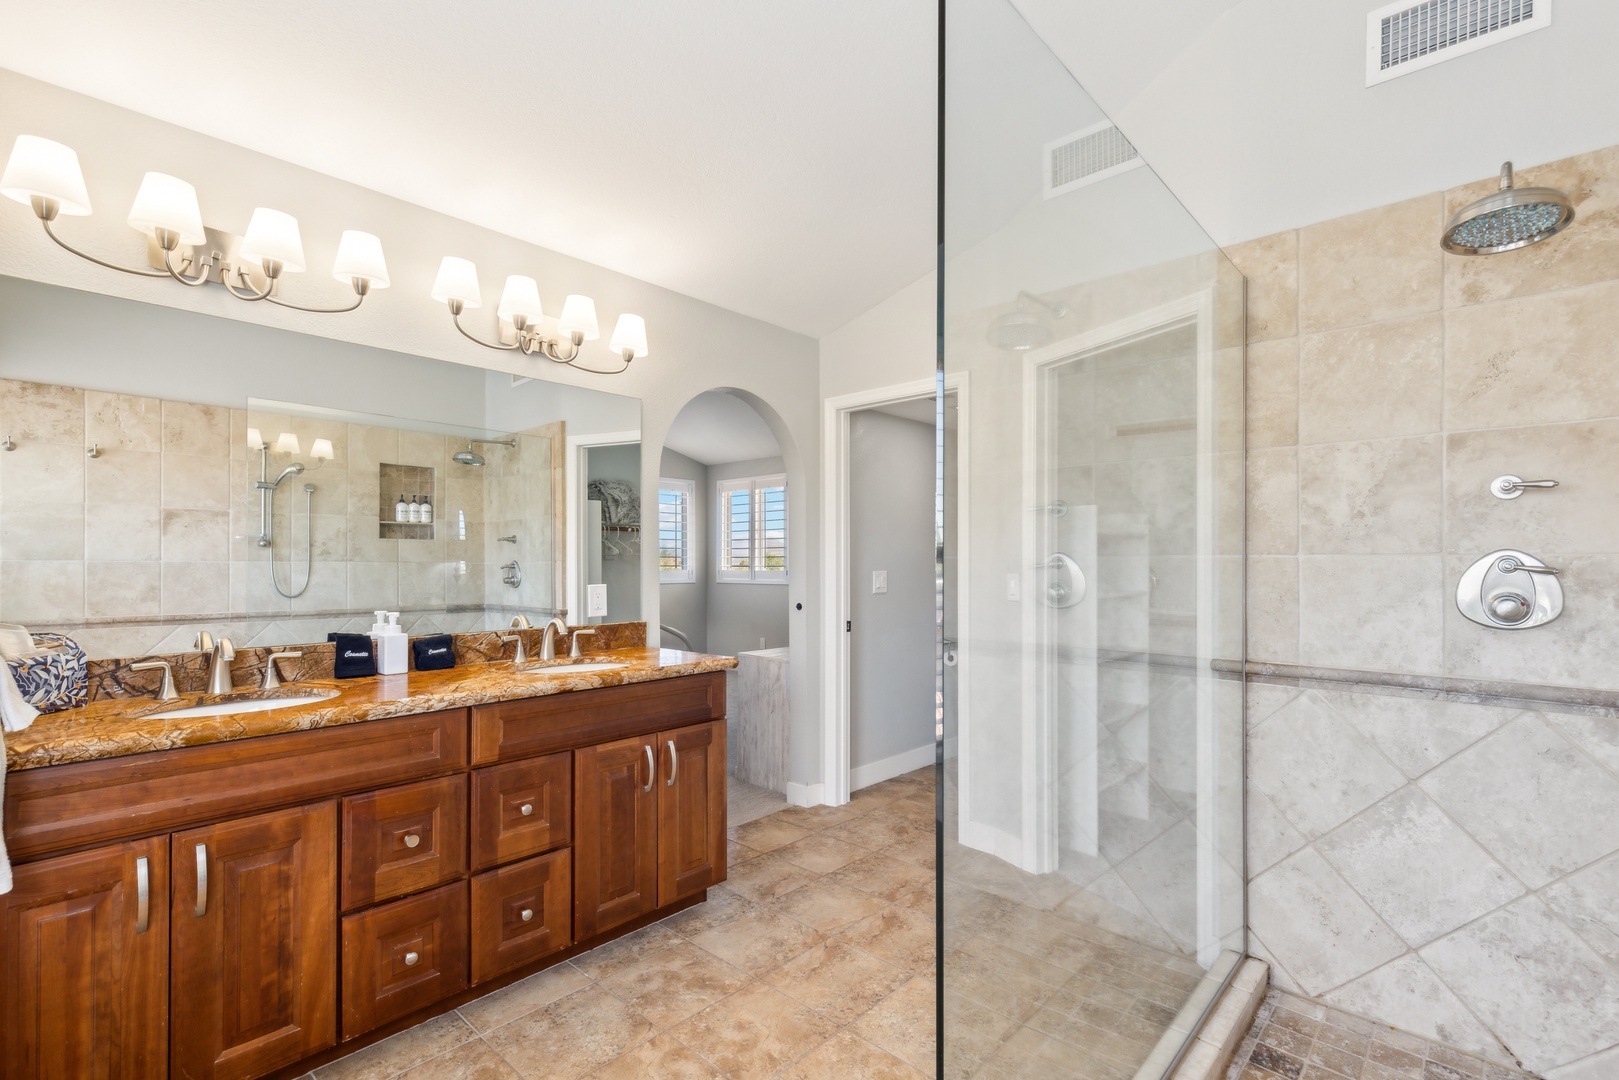 Ensuite bathroom with dual sinks, and walk-in shower with dual shower heads